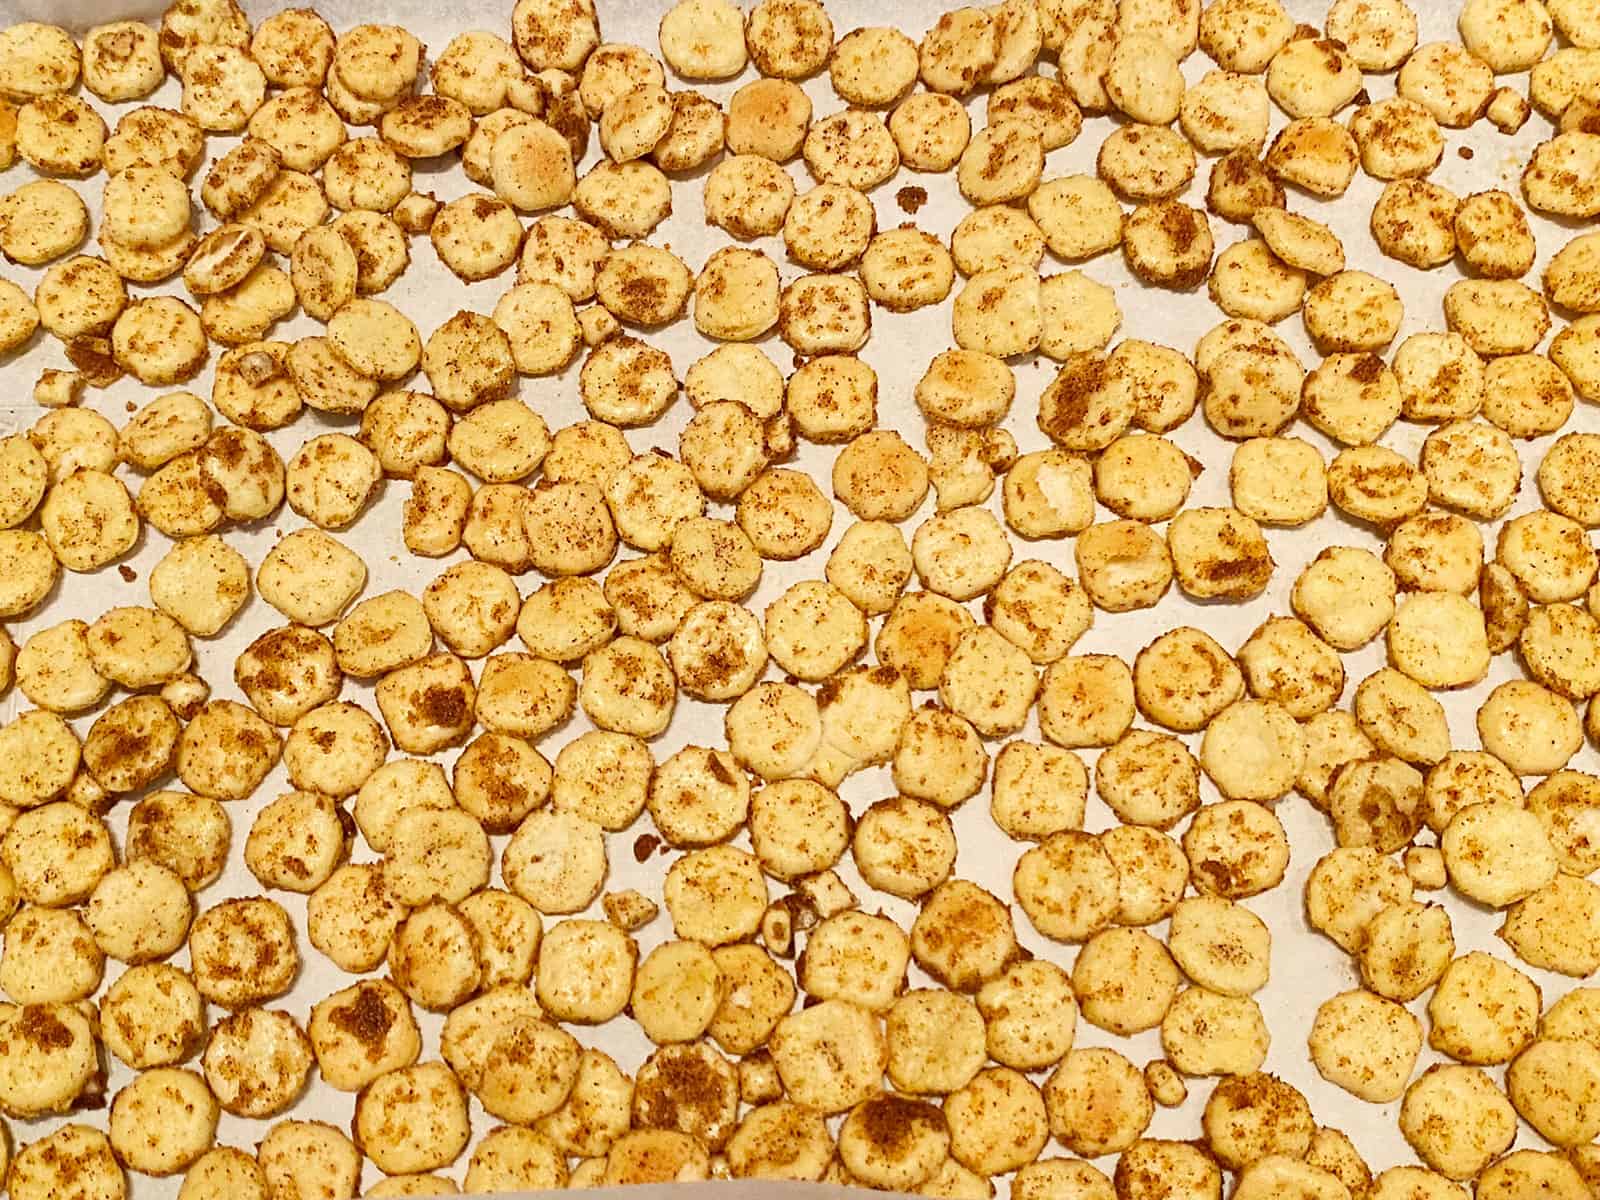 BBQ spice-coated crackers on a sheet pan